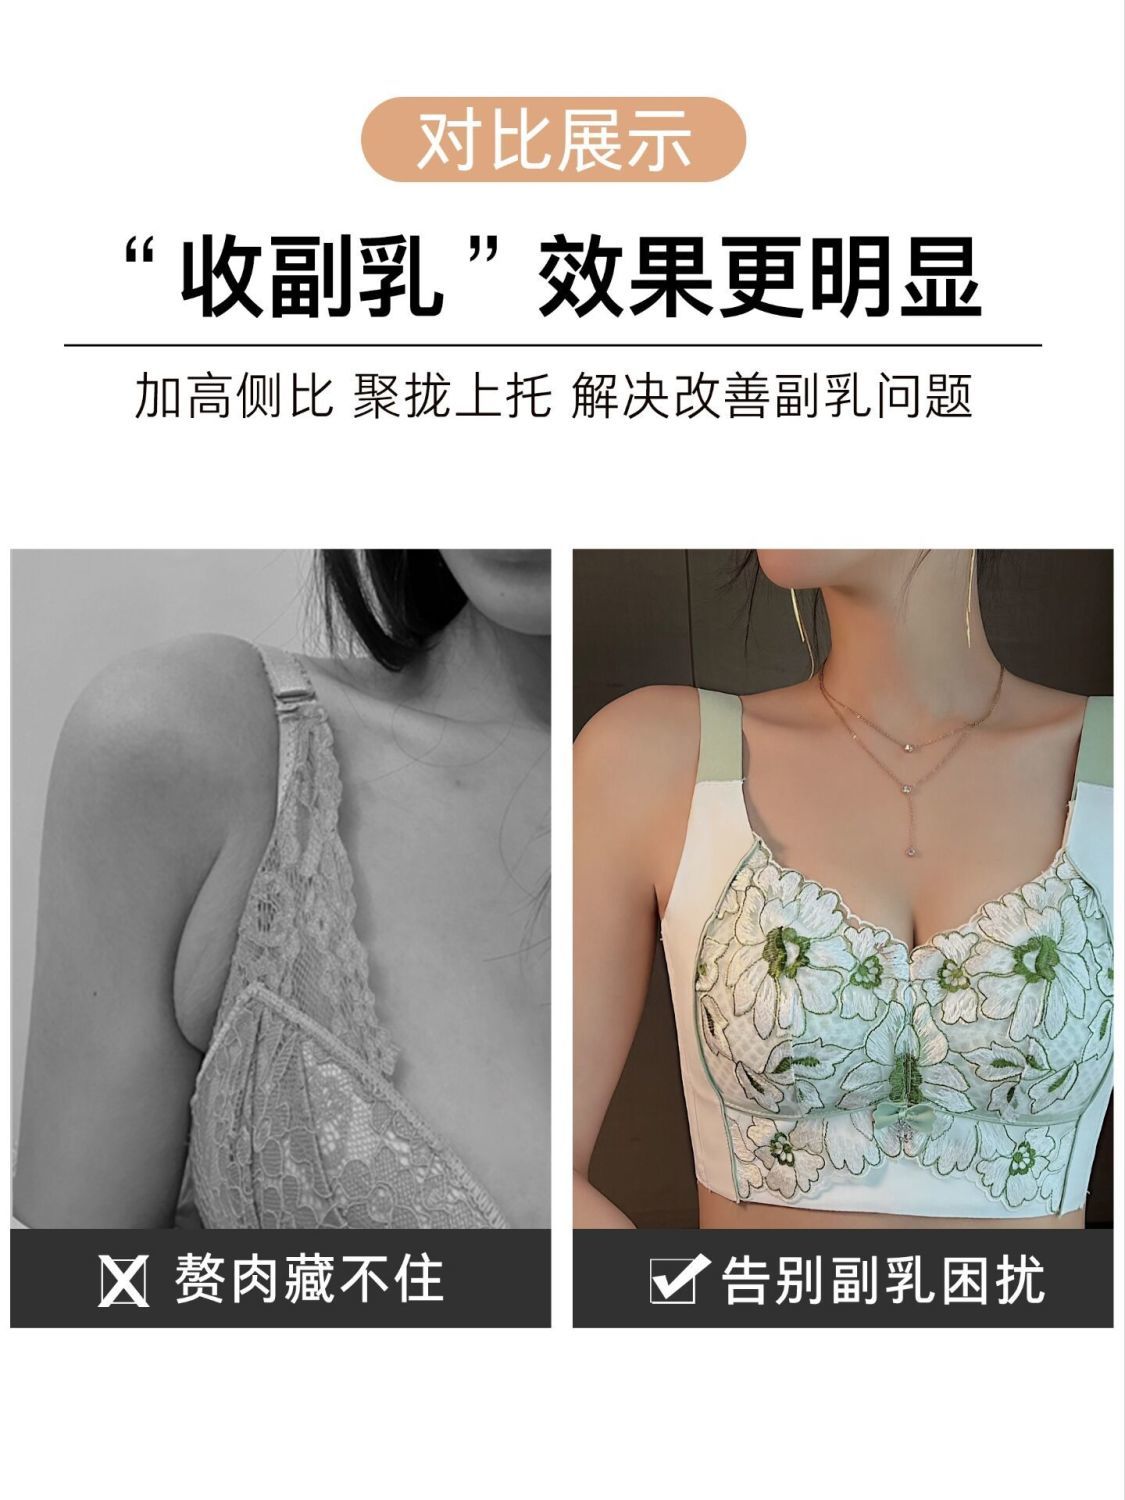 Large breasts showing small underwear women's adjustable side collection breast anti-sagging bra summer thin section large size full cup bra